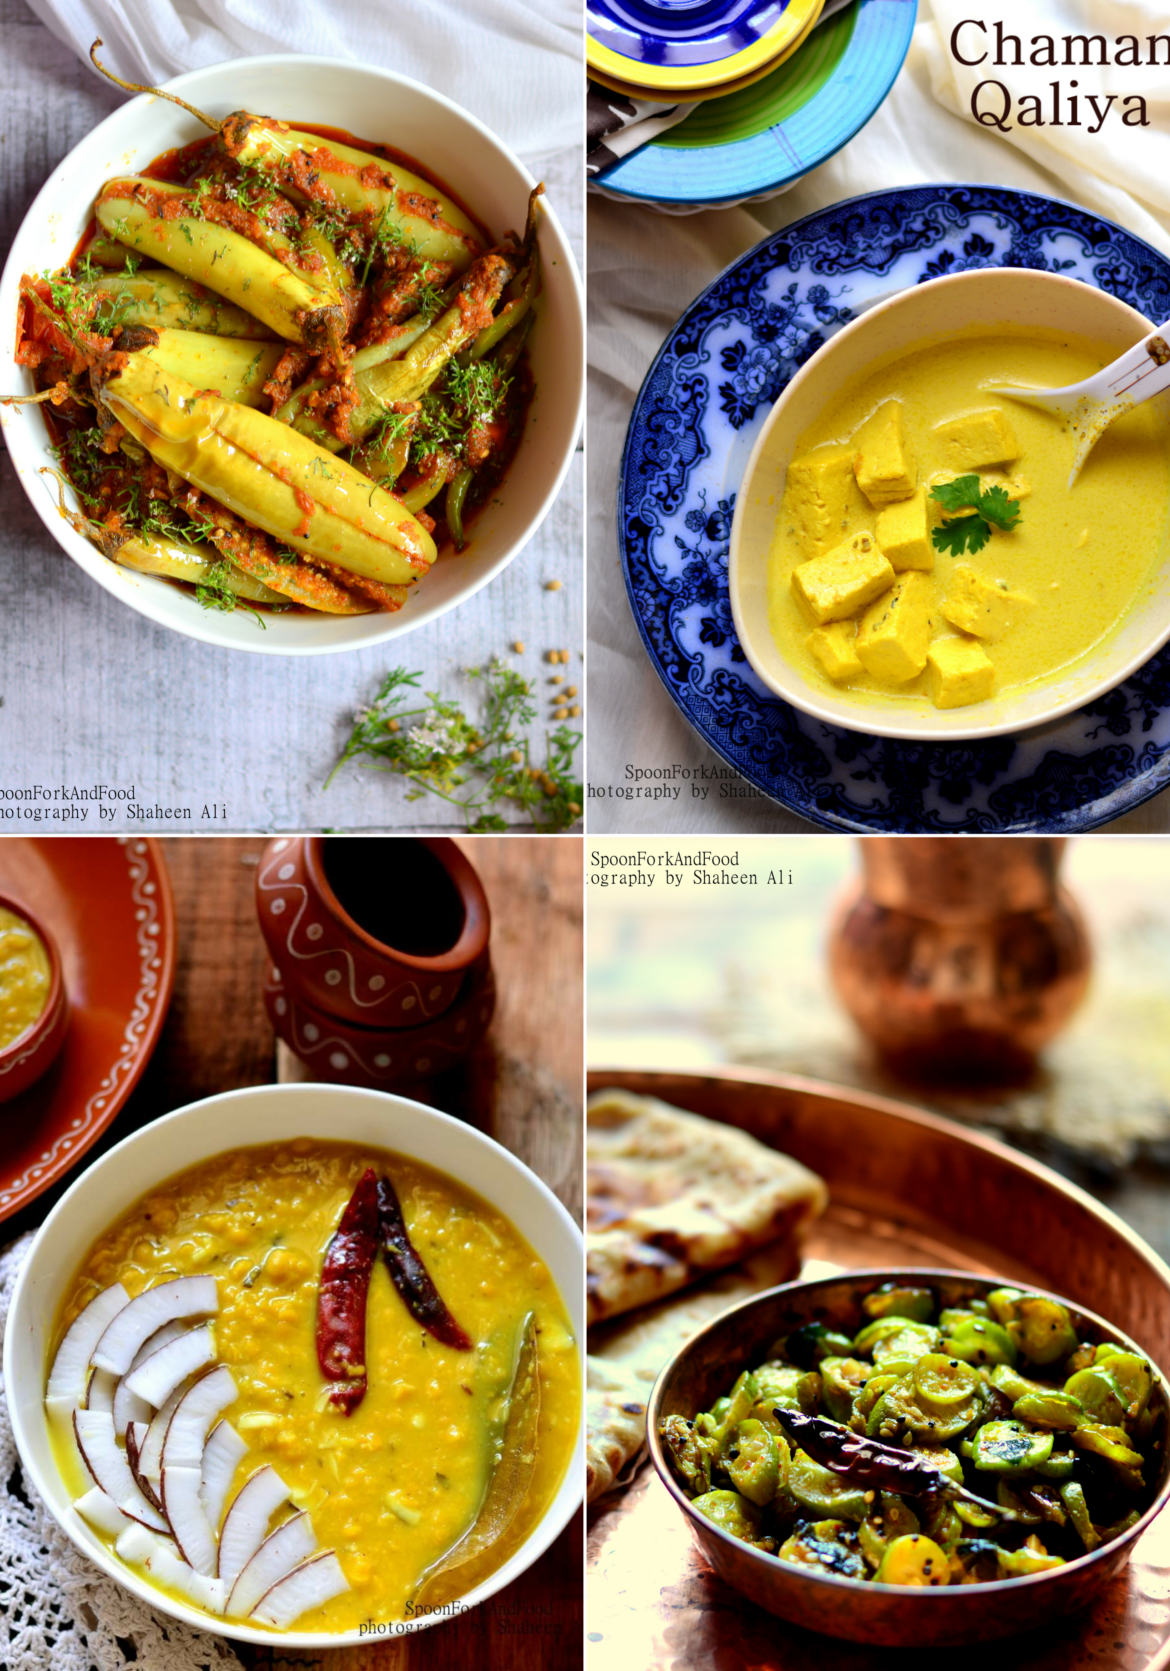 11 Tasty Recipes For Breakfast, Lunch And Dinner - NDTV Food